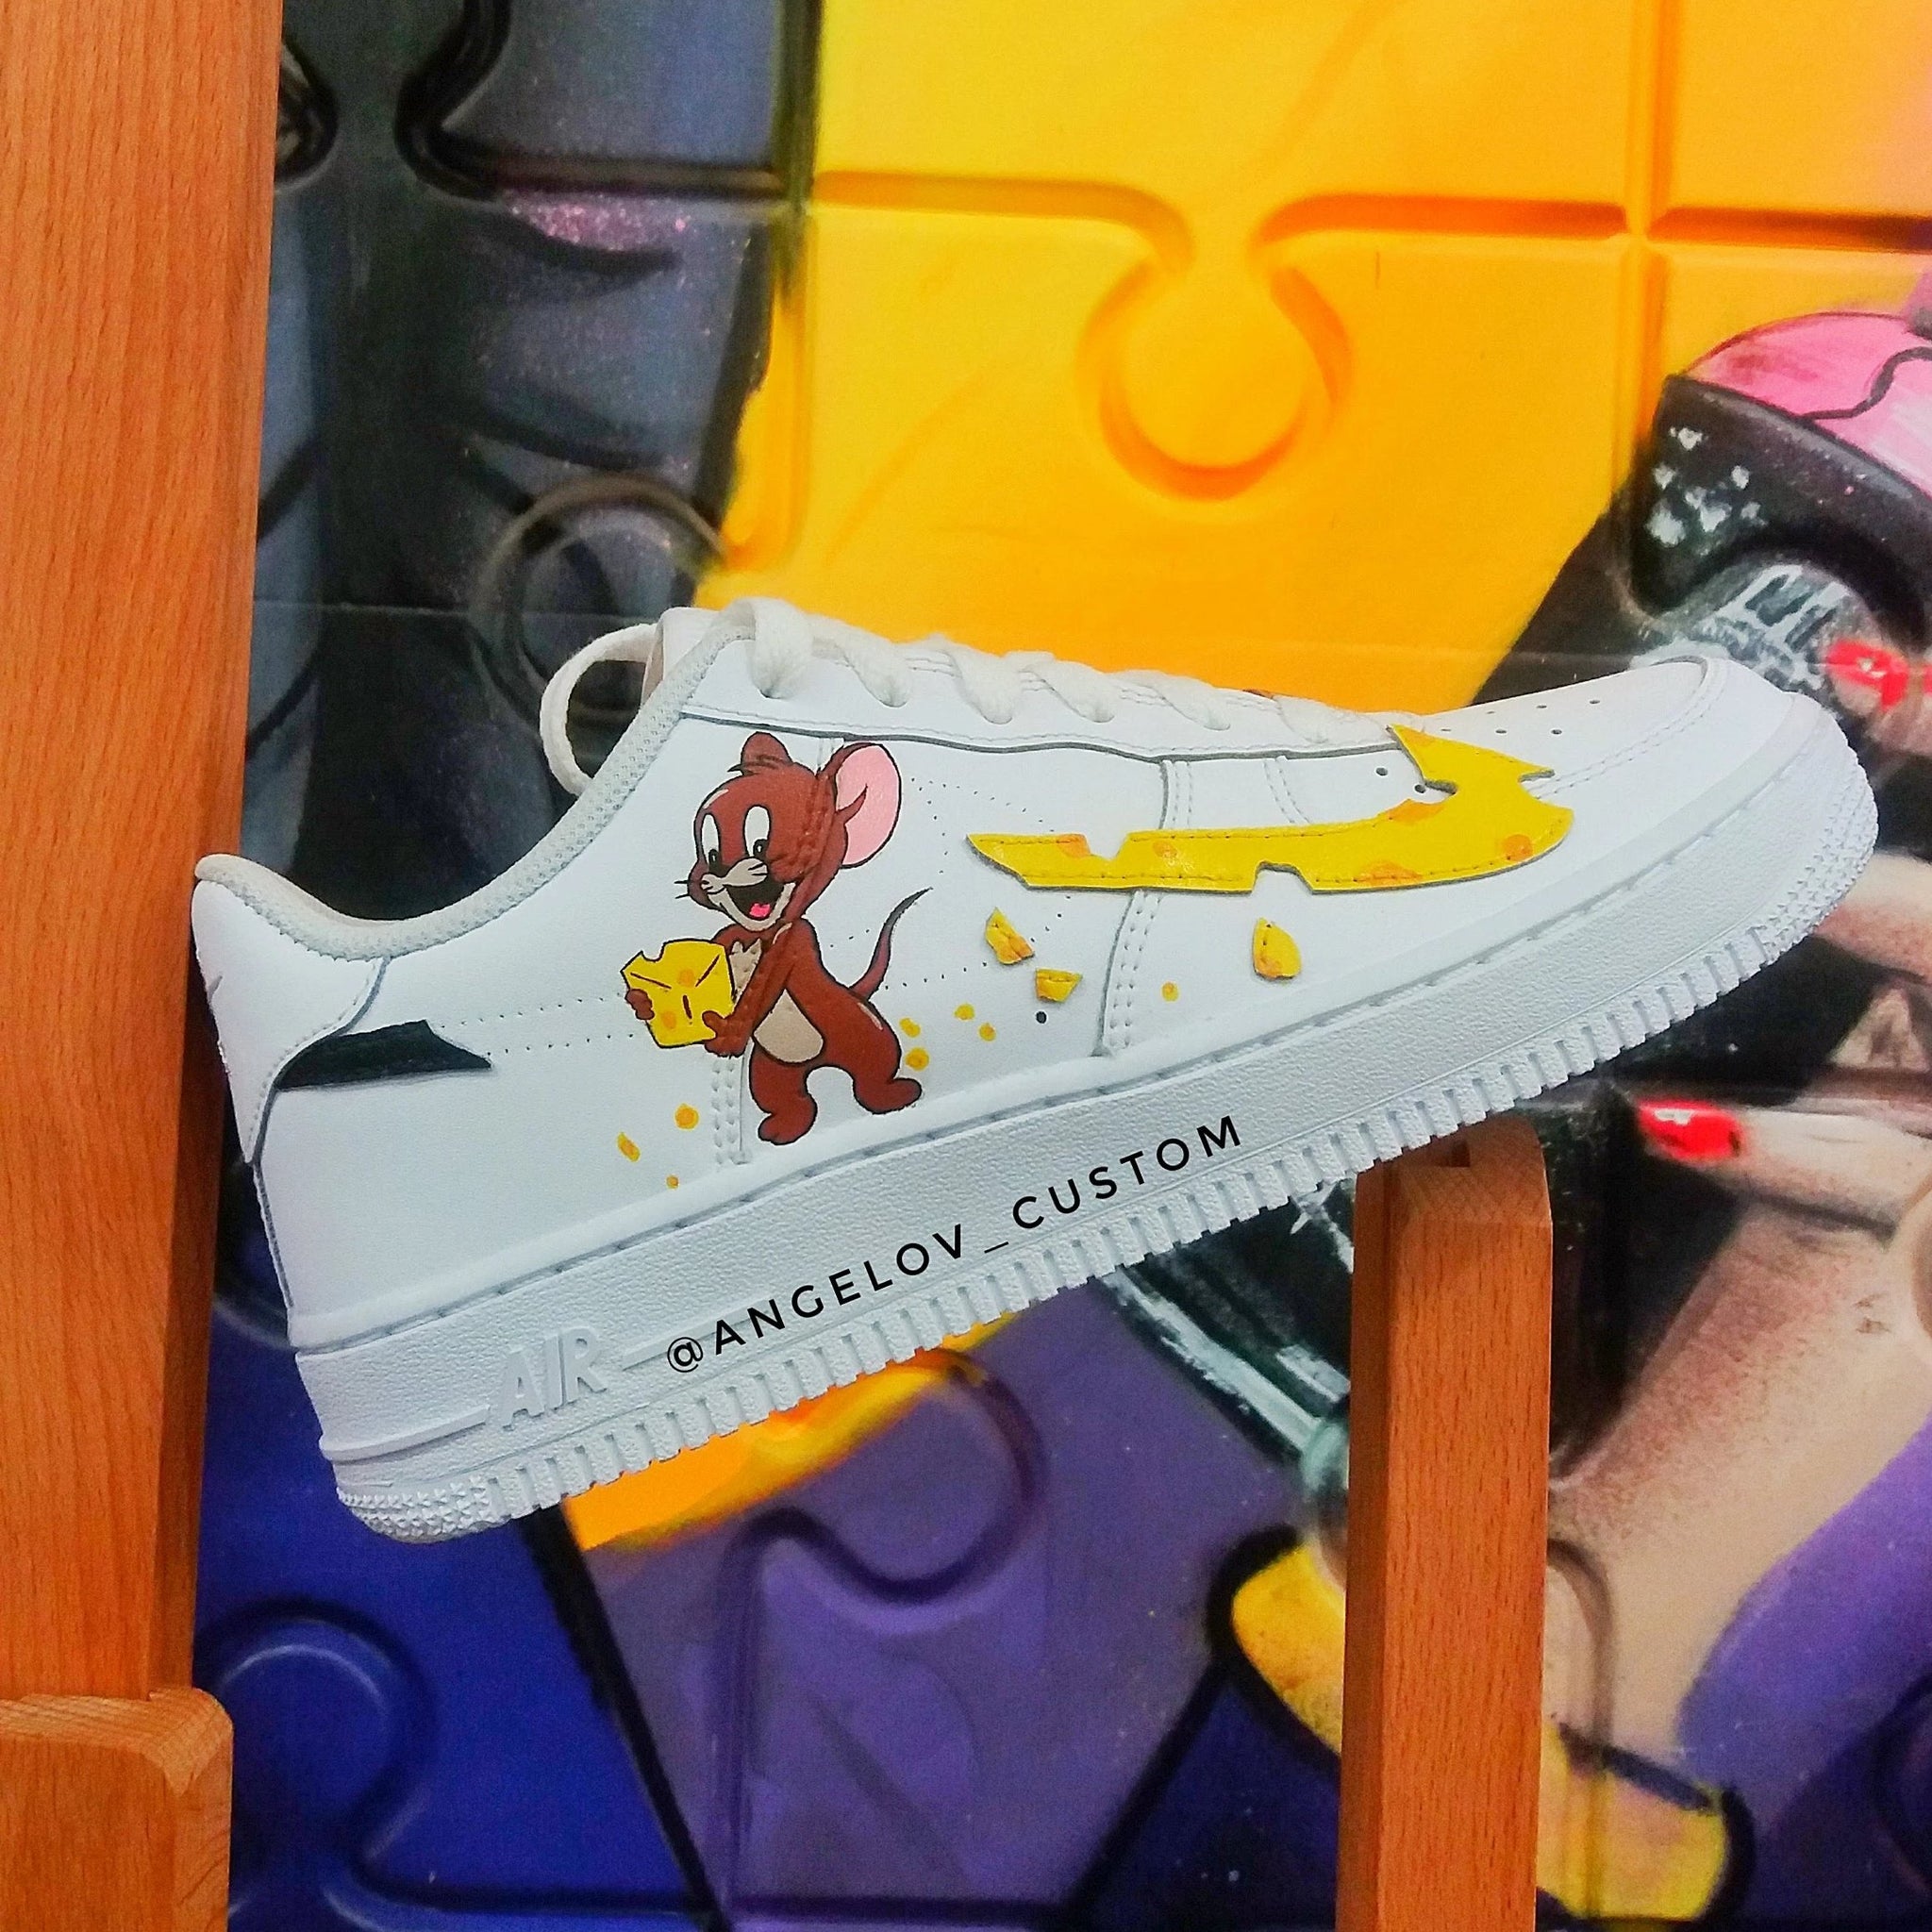 tom and jerry air force 1